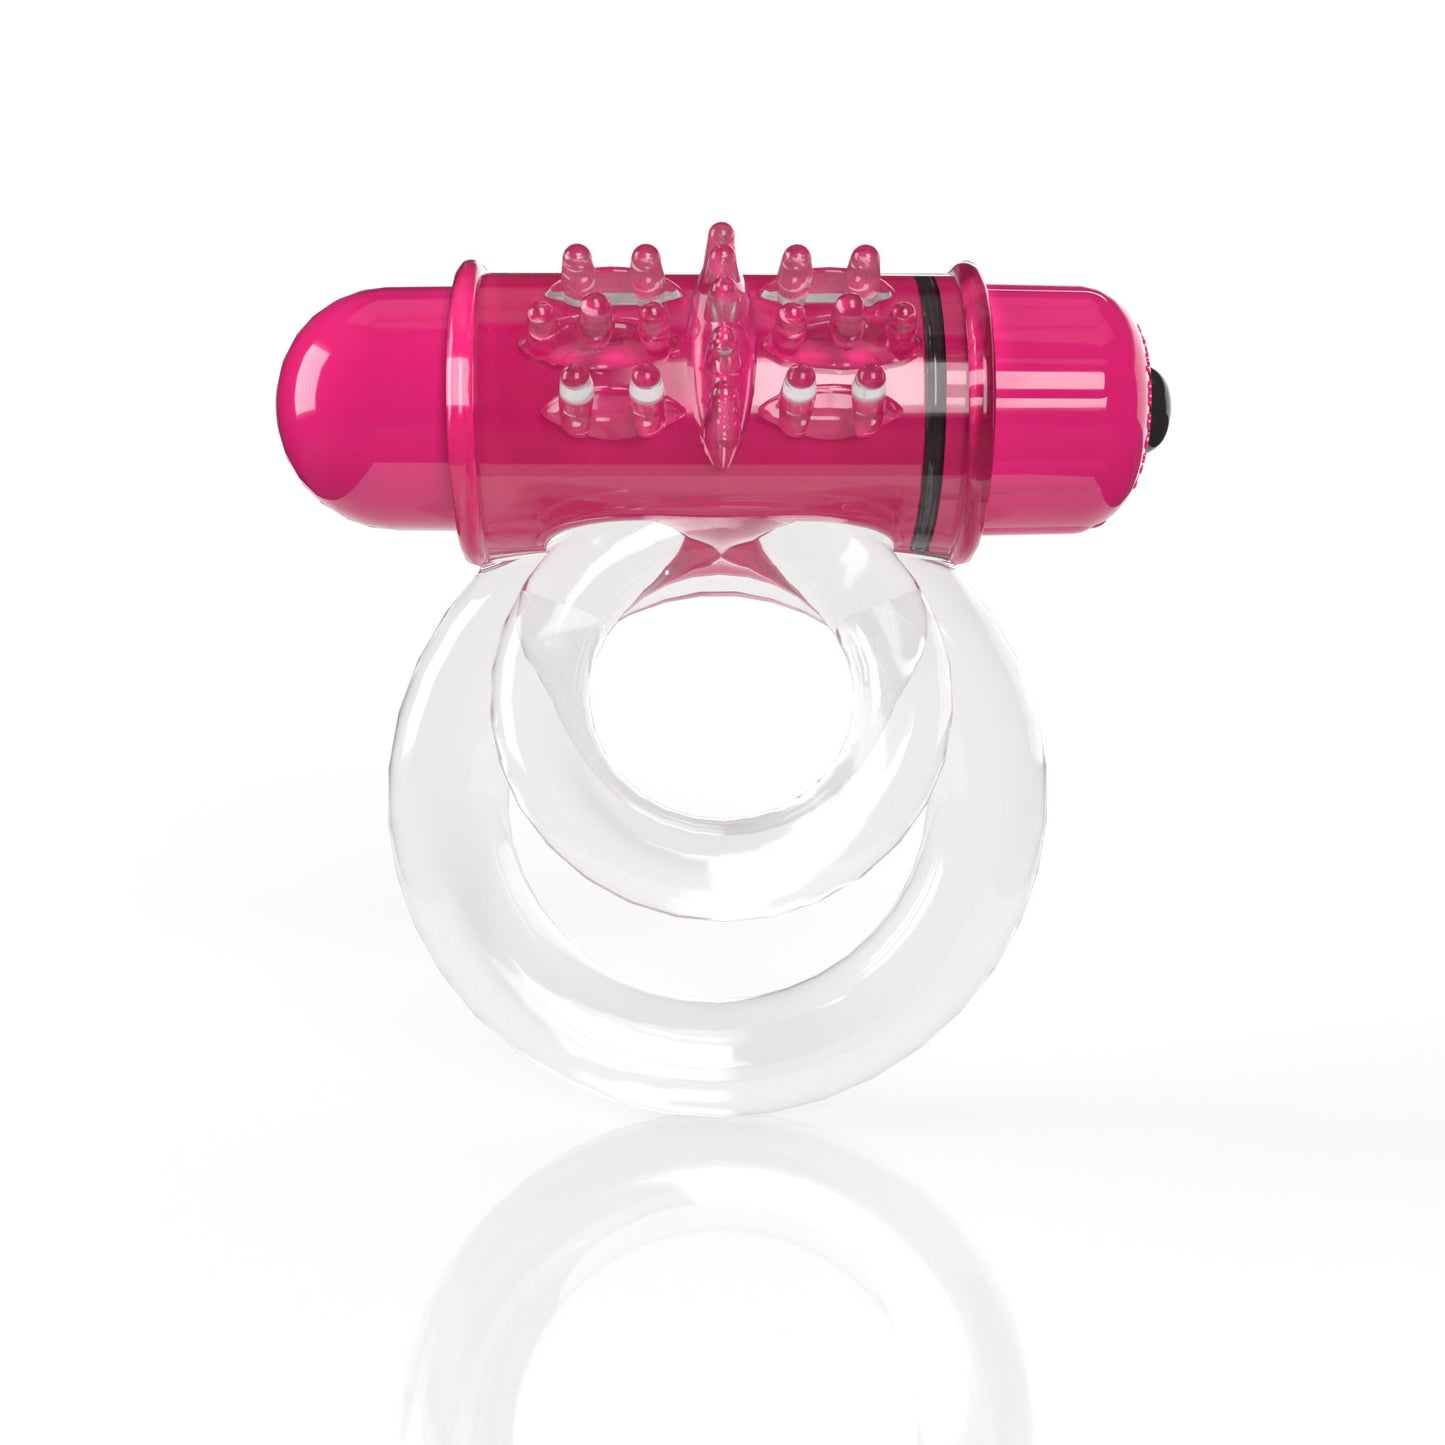 Screaming O 4b - Double O Super Powered Vibrating  Double Ring - Strawberry